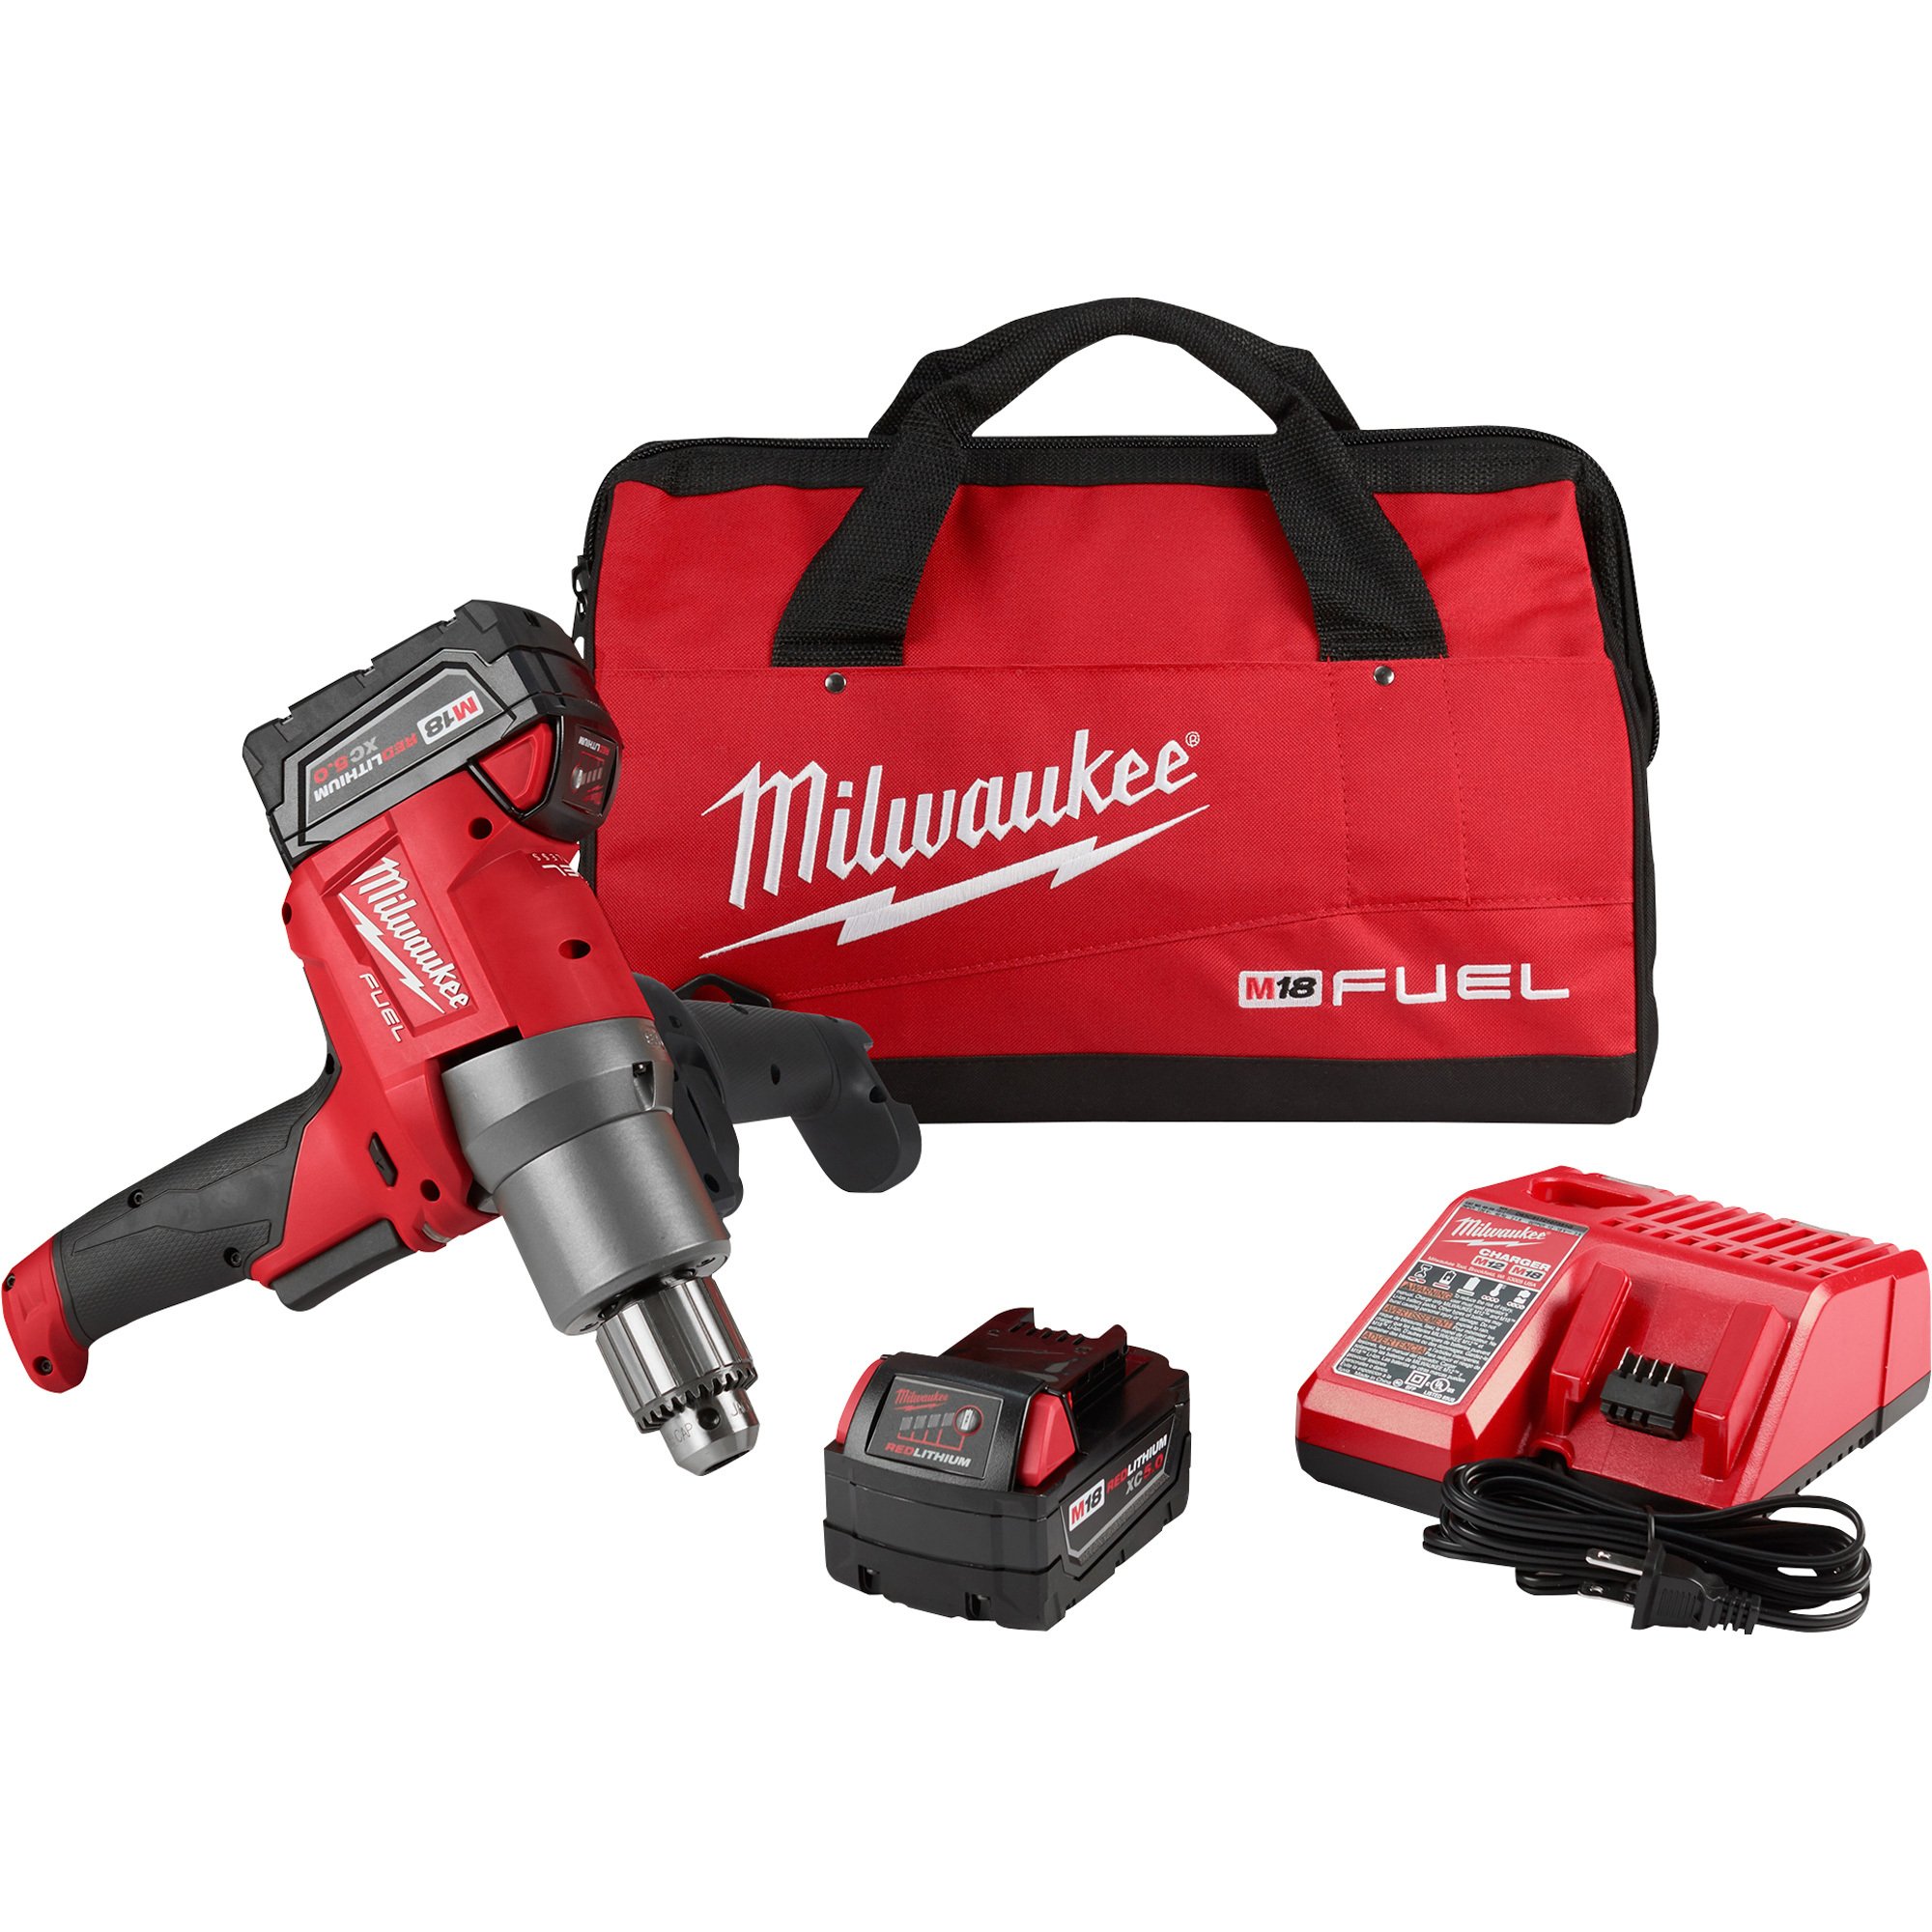 Milwaukee M18 Fuel Mud Mixer Kit with LED Light — With 2 Batteries